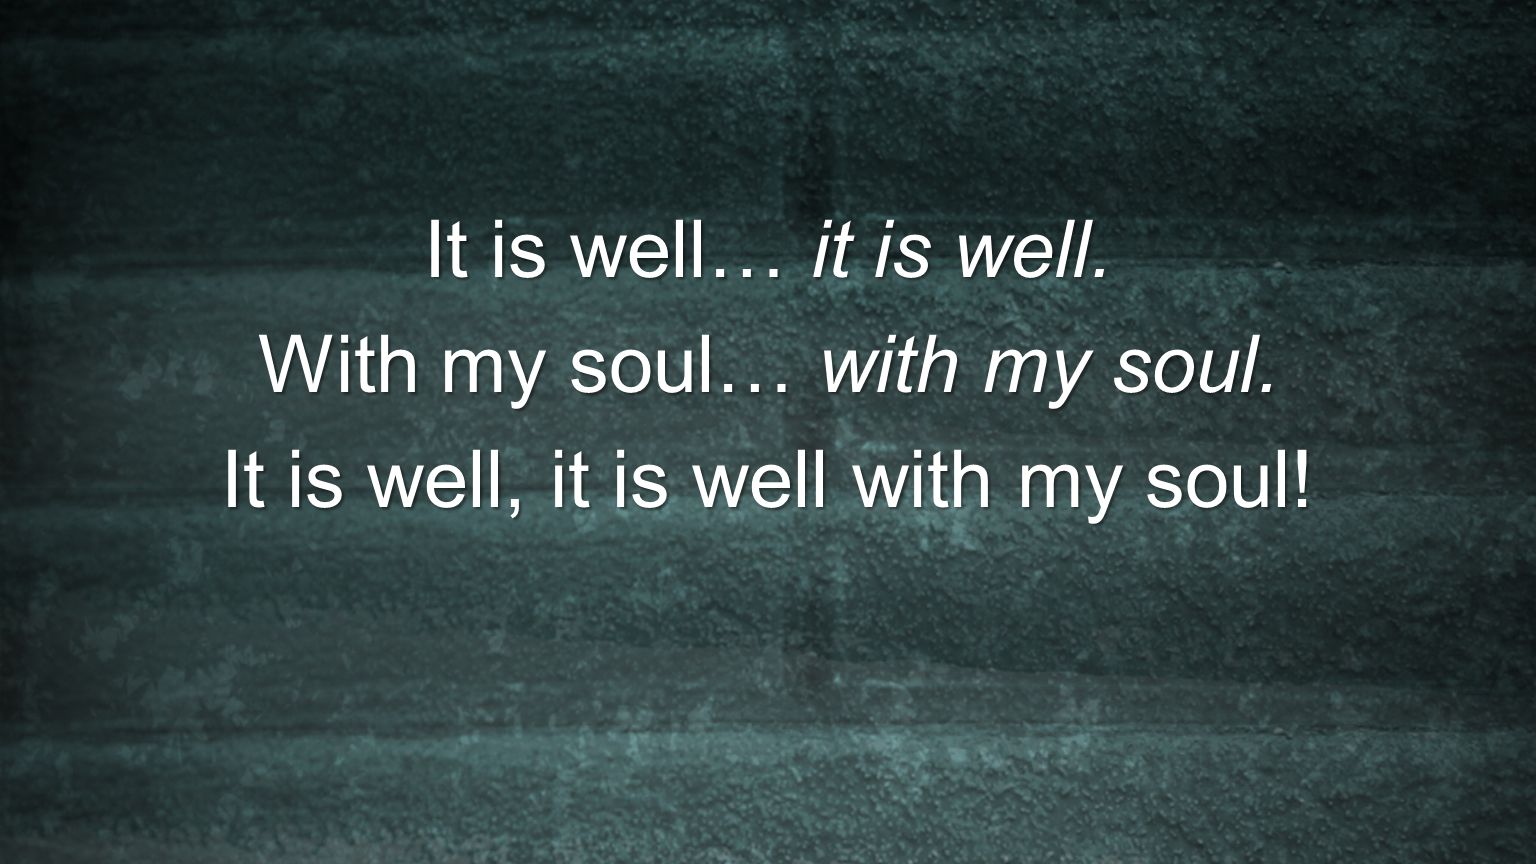 With my soul… with my soul. It is well, it is well with my soul!